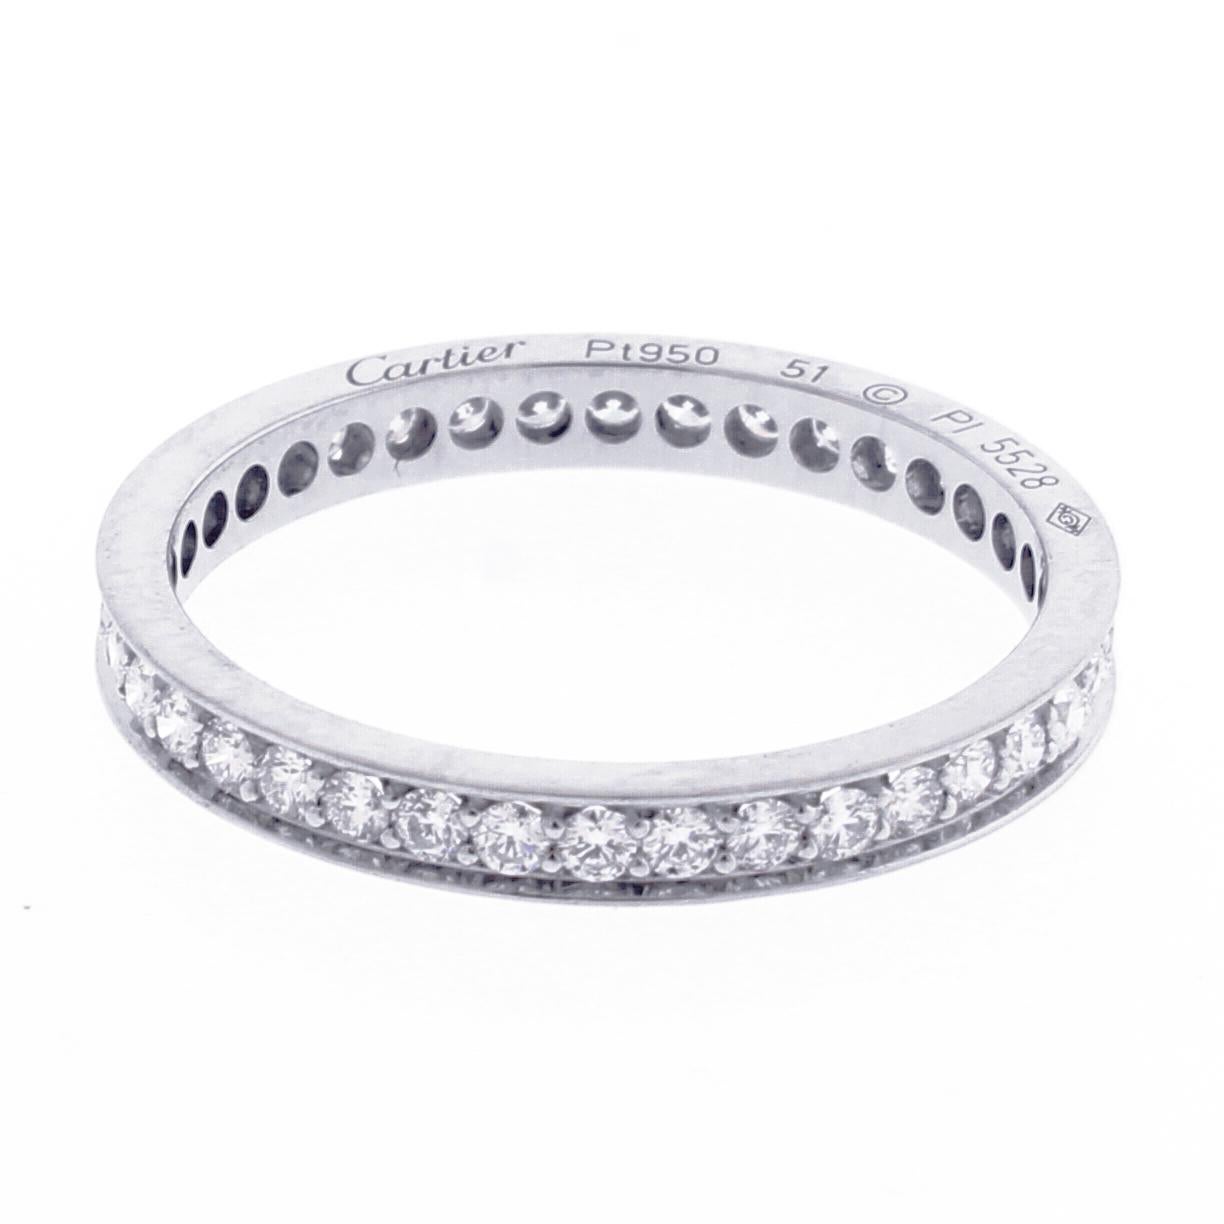 From Cartier thier diamond band perfect for stacking or wearing alone
♦ Designer: Cartier
♦ Metal: Platinum
♦ 50 diamonds .48 carats, F VVS
♦ 2.5mm wide
♦ Circa 2015
♦ Size 51  US size 5¾
♦ Packaging: Cartier box 
♦ Condition: Excellent ,